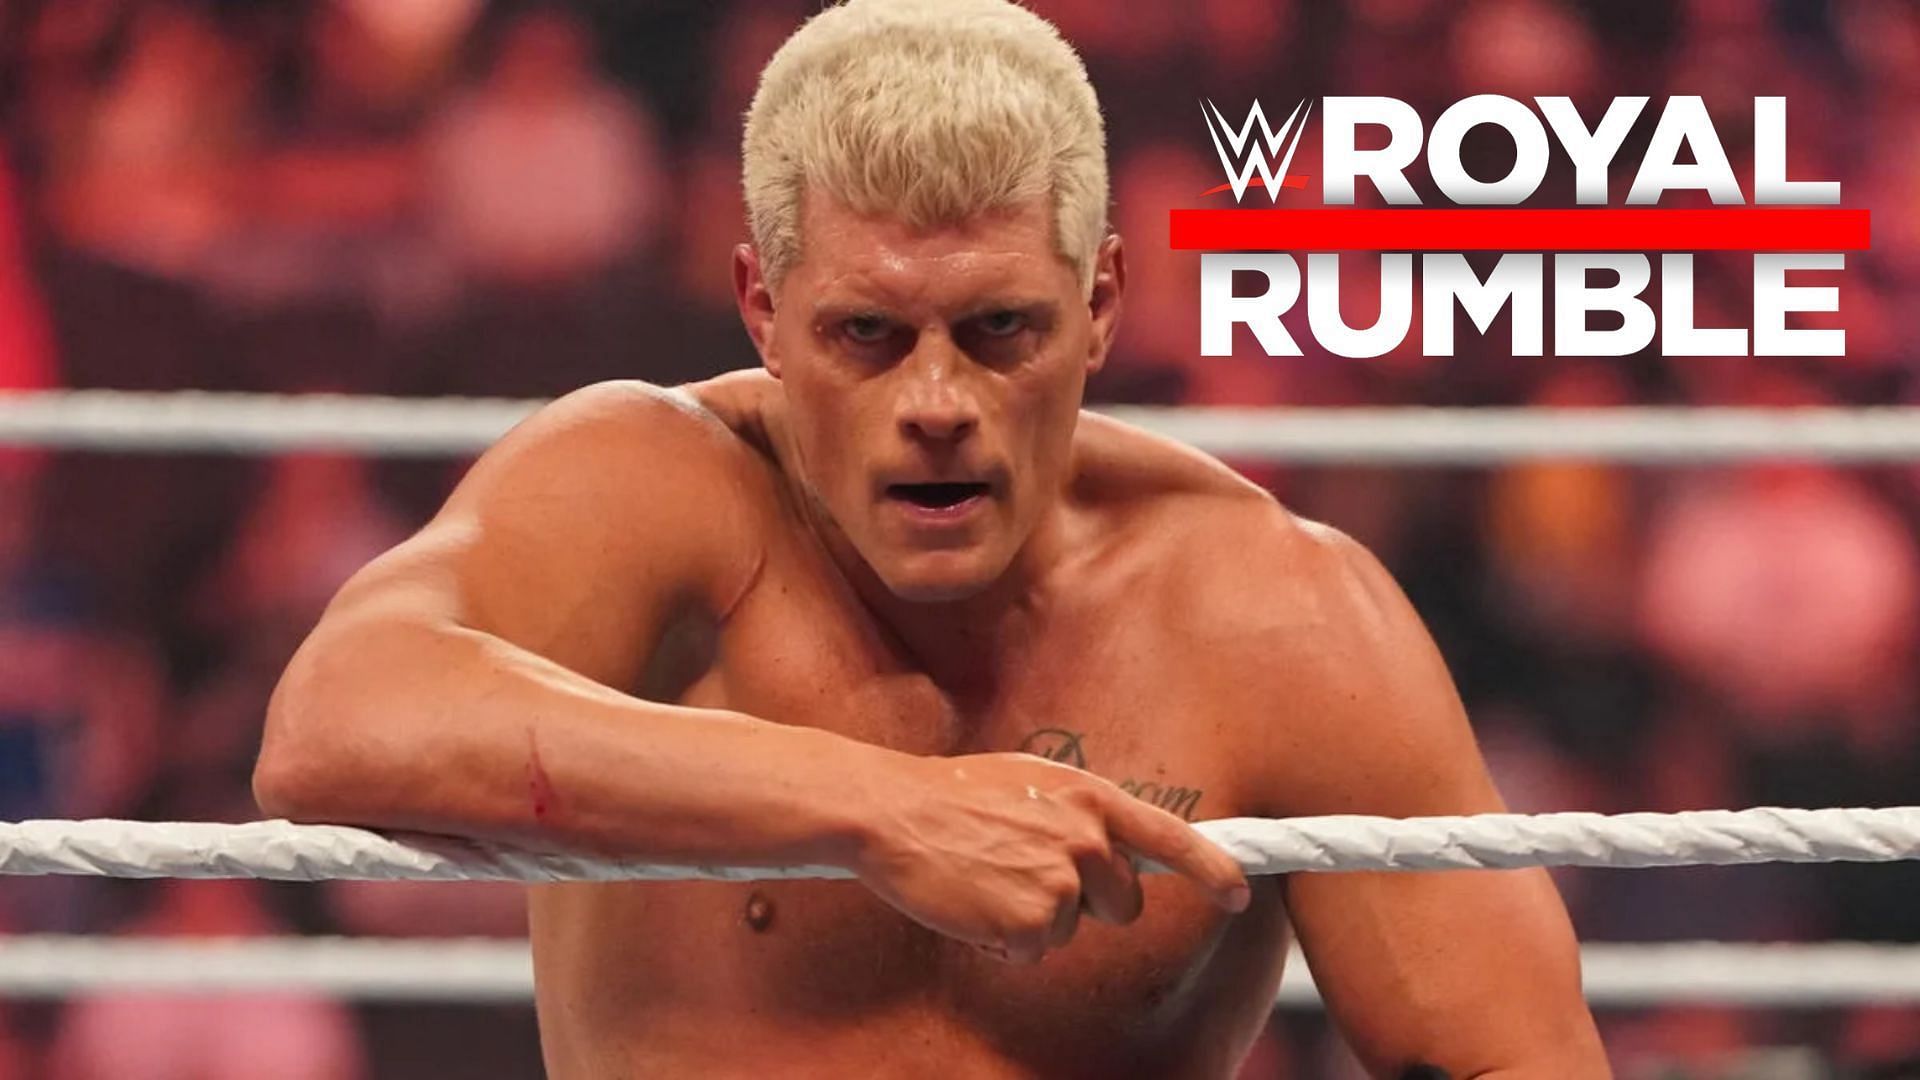 Cody Rhodes has announced his entry into the Royal Rumble Match in 2024